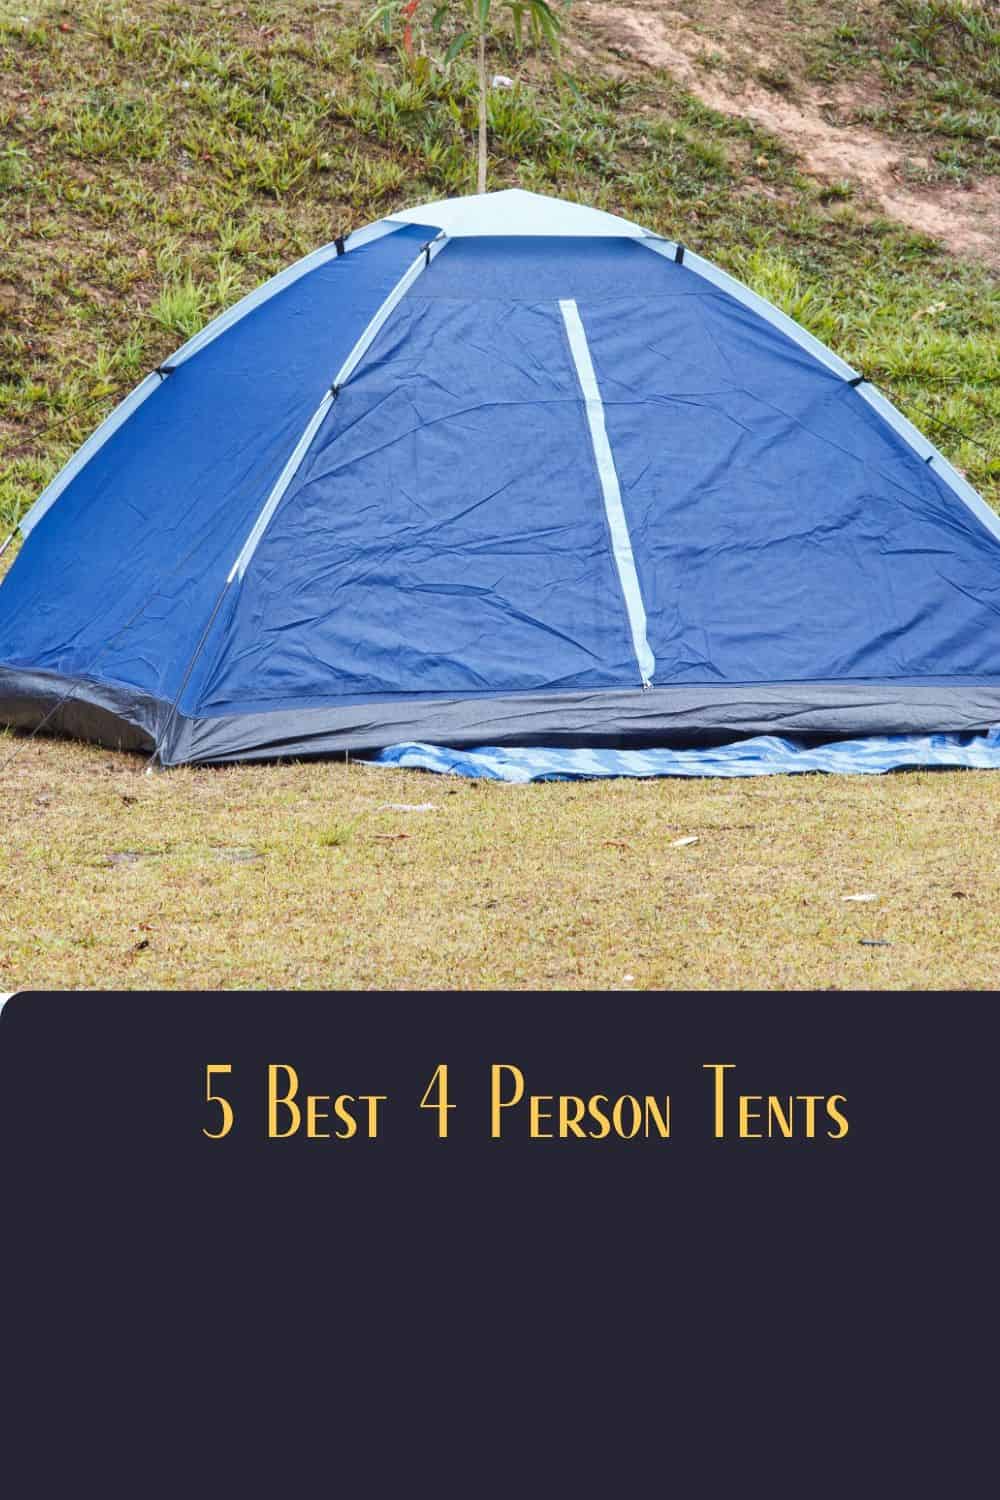 Pinterest image for 5 Best 4 Person Tents